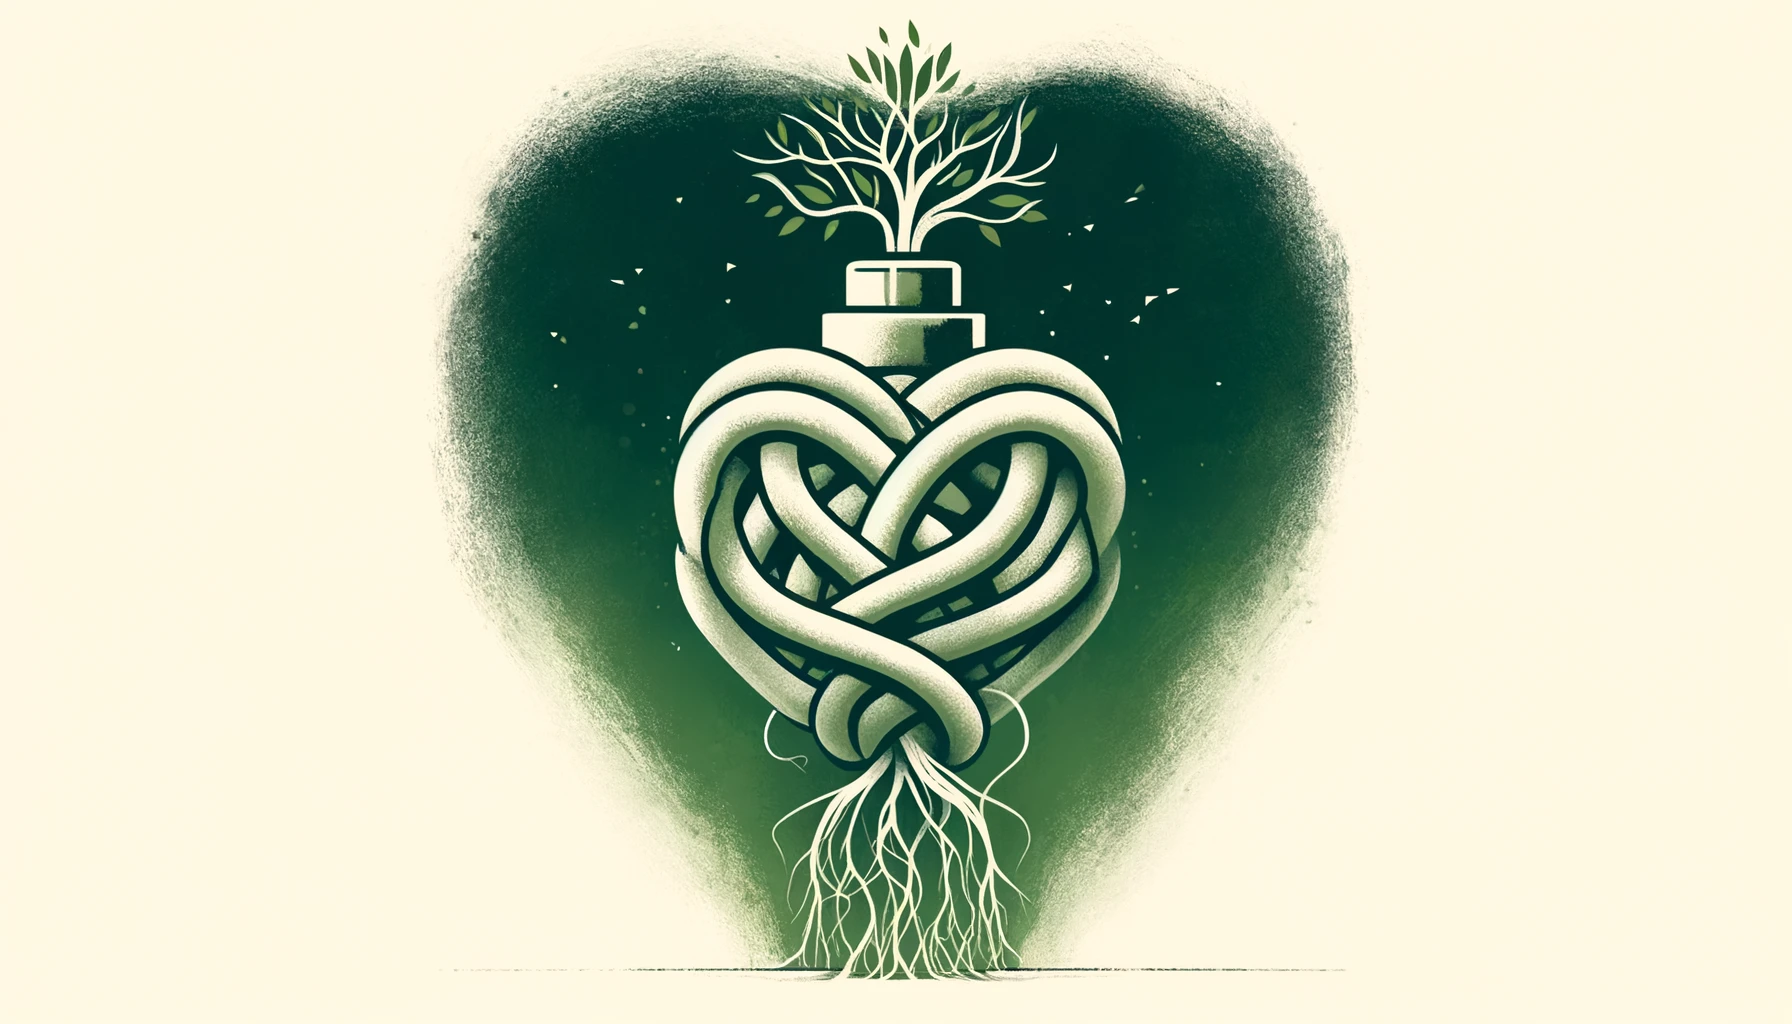 A symbolic image of a heart-shaped knot with interwoven ropes and a tree growing from the top, rooted in the knot, set against a dark background, representing growth and complexity in relationships.